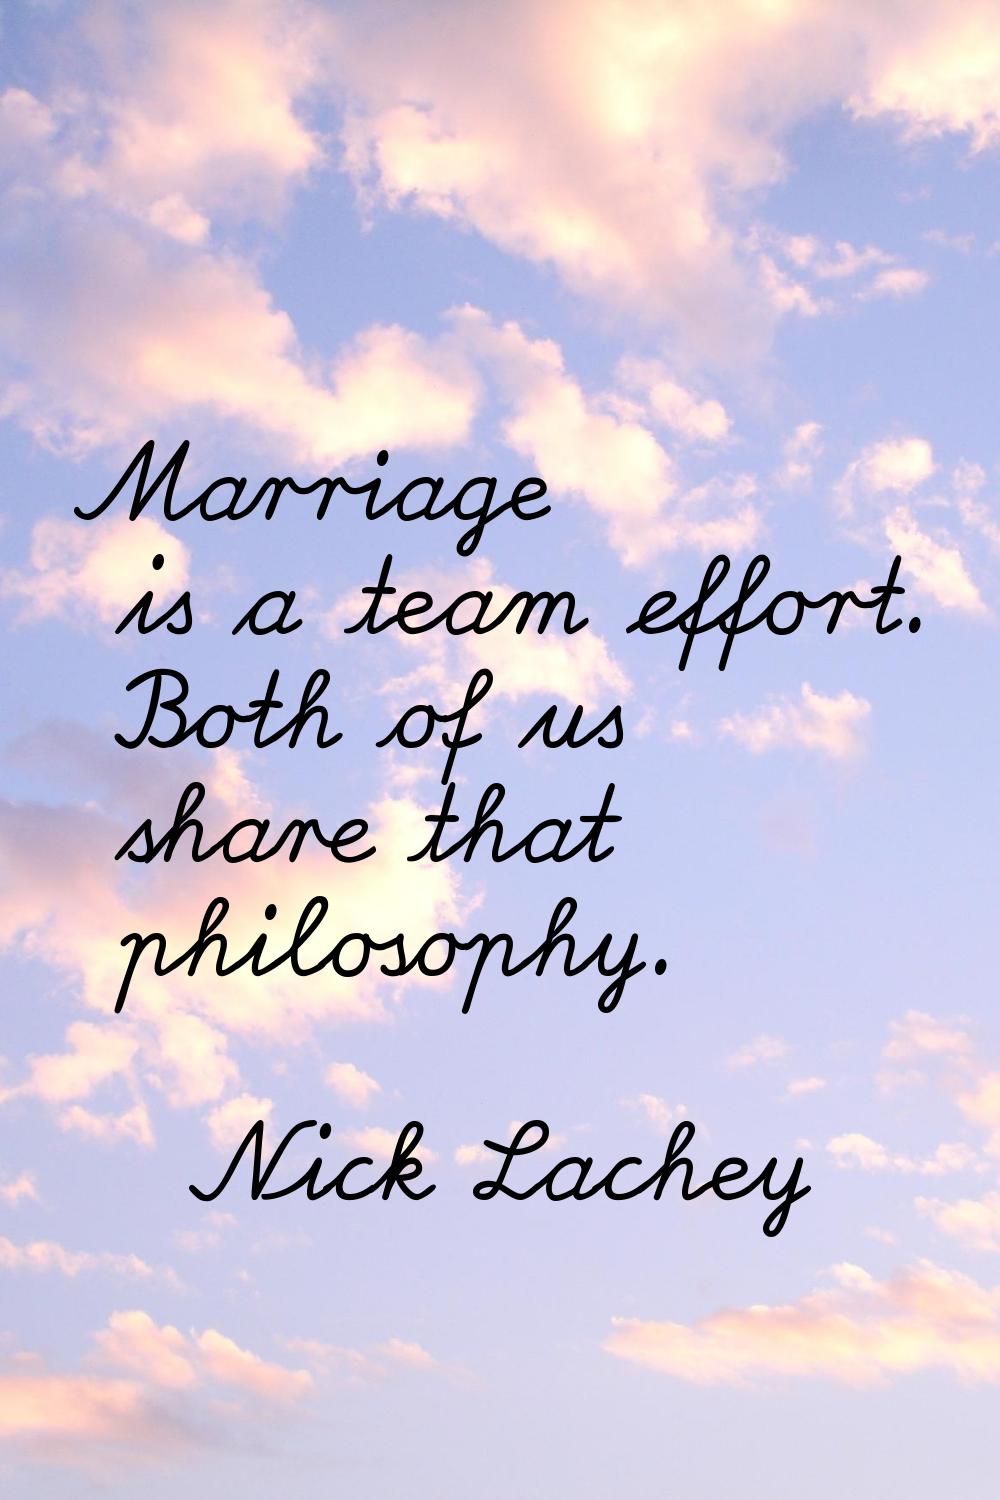 Marriage is a team effort. Both of us share that philosophy.